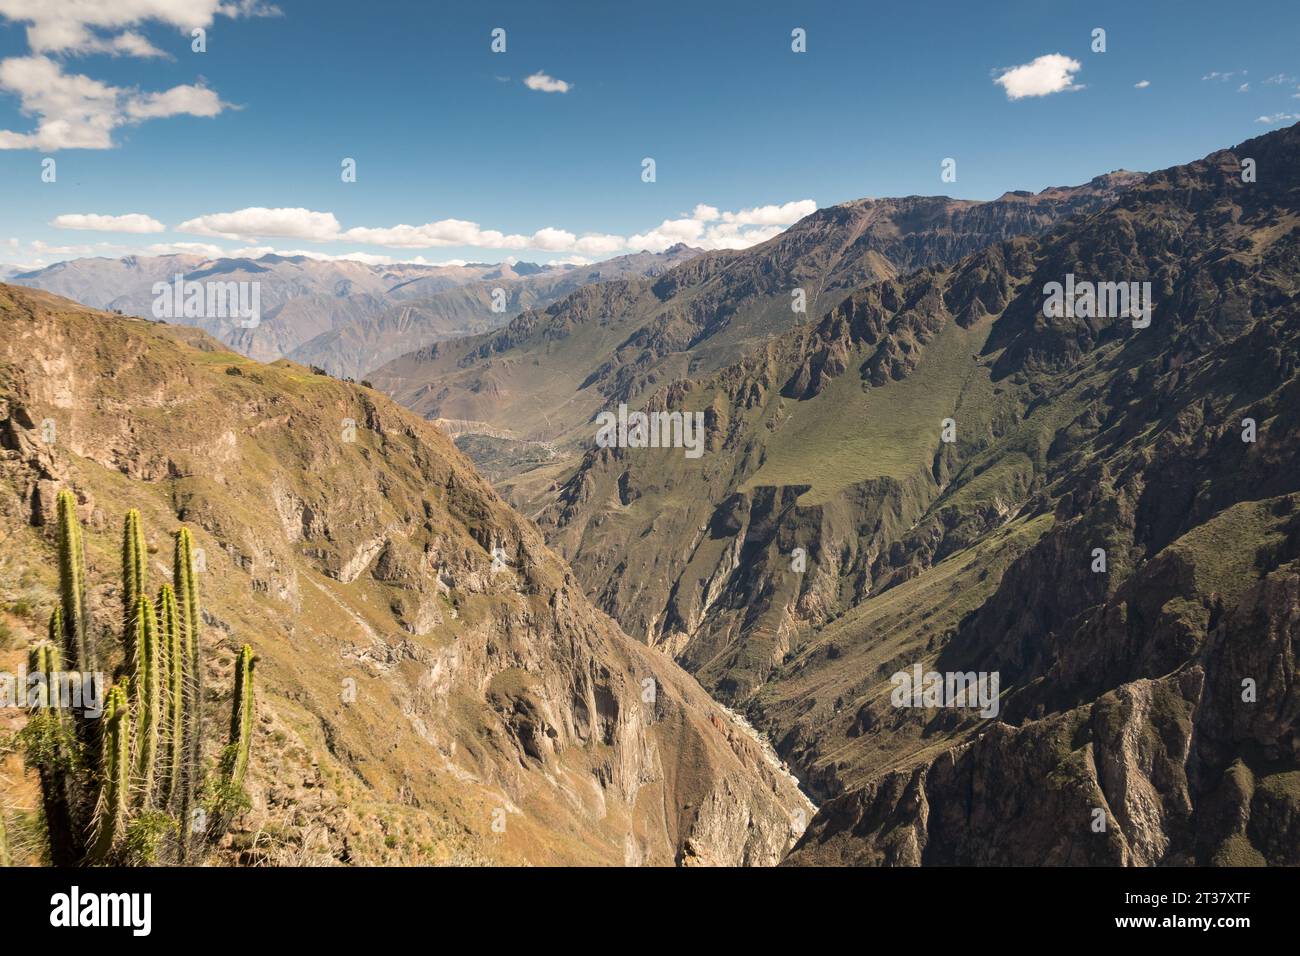 Canyon de Colca, Cabanaconde, Peru. The Rio Colca has forged an immense canyon, twice the depth of the American Grand Canyon and one of the deepest. Stock Photo